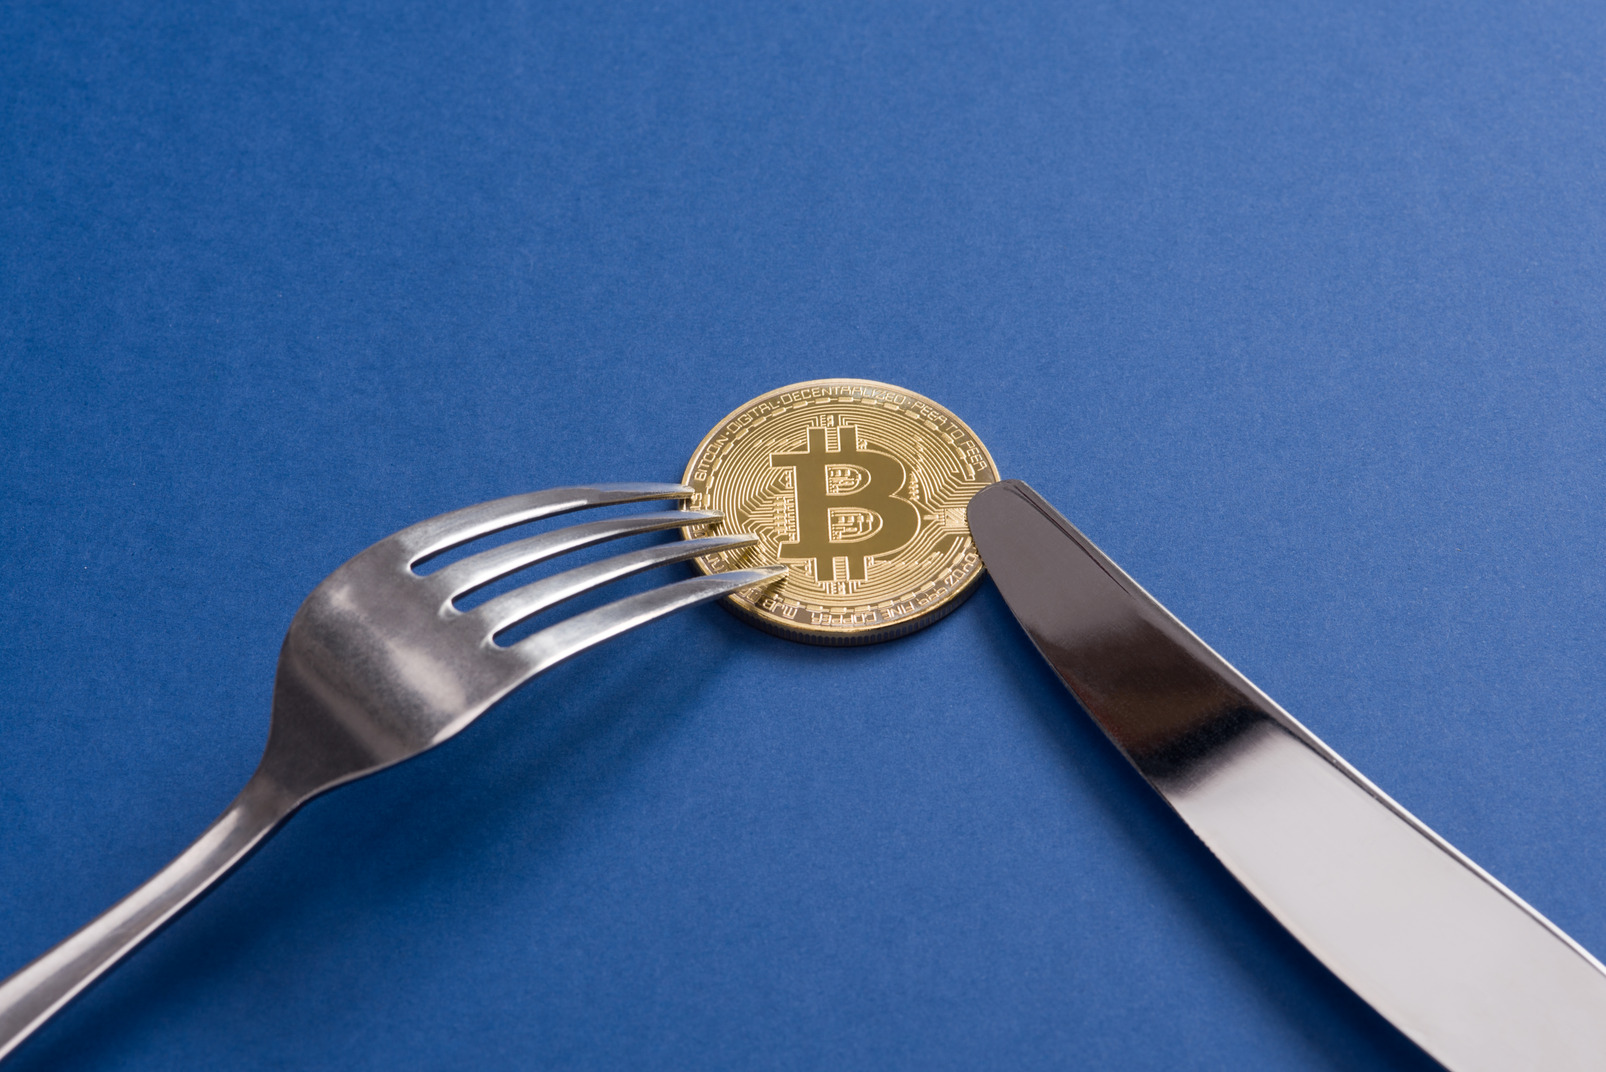 Some food for thought about bitcoin